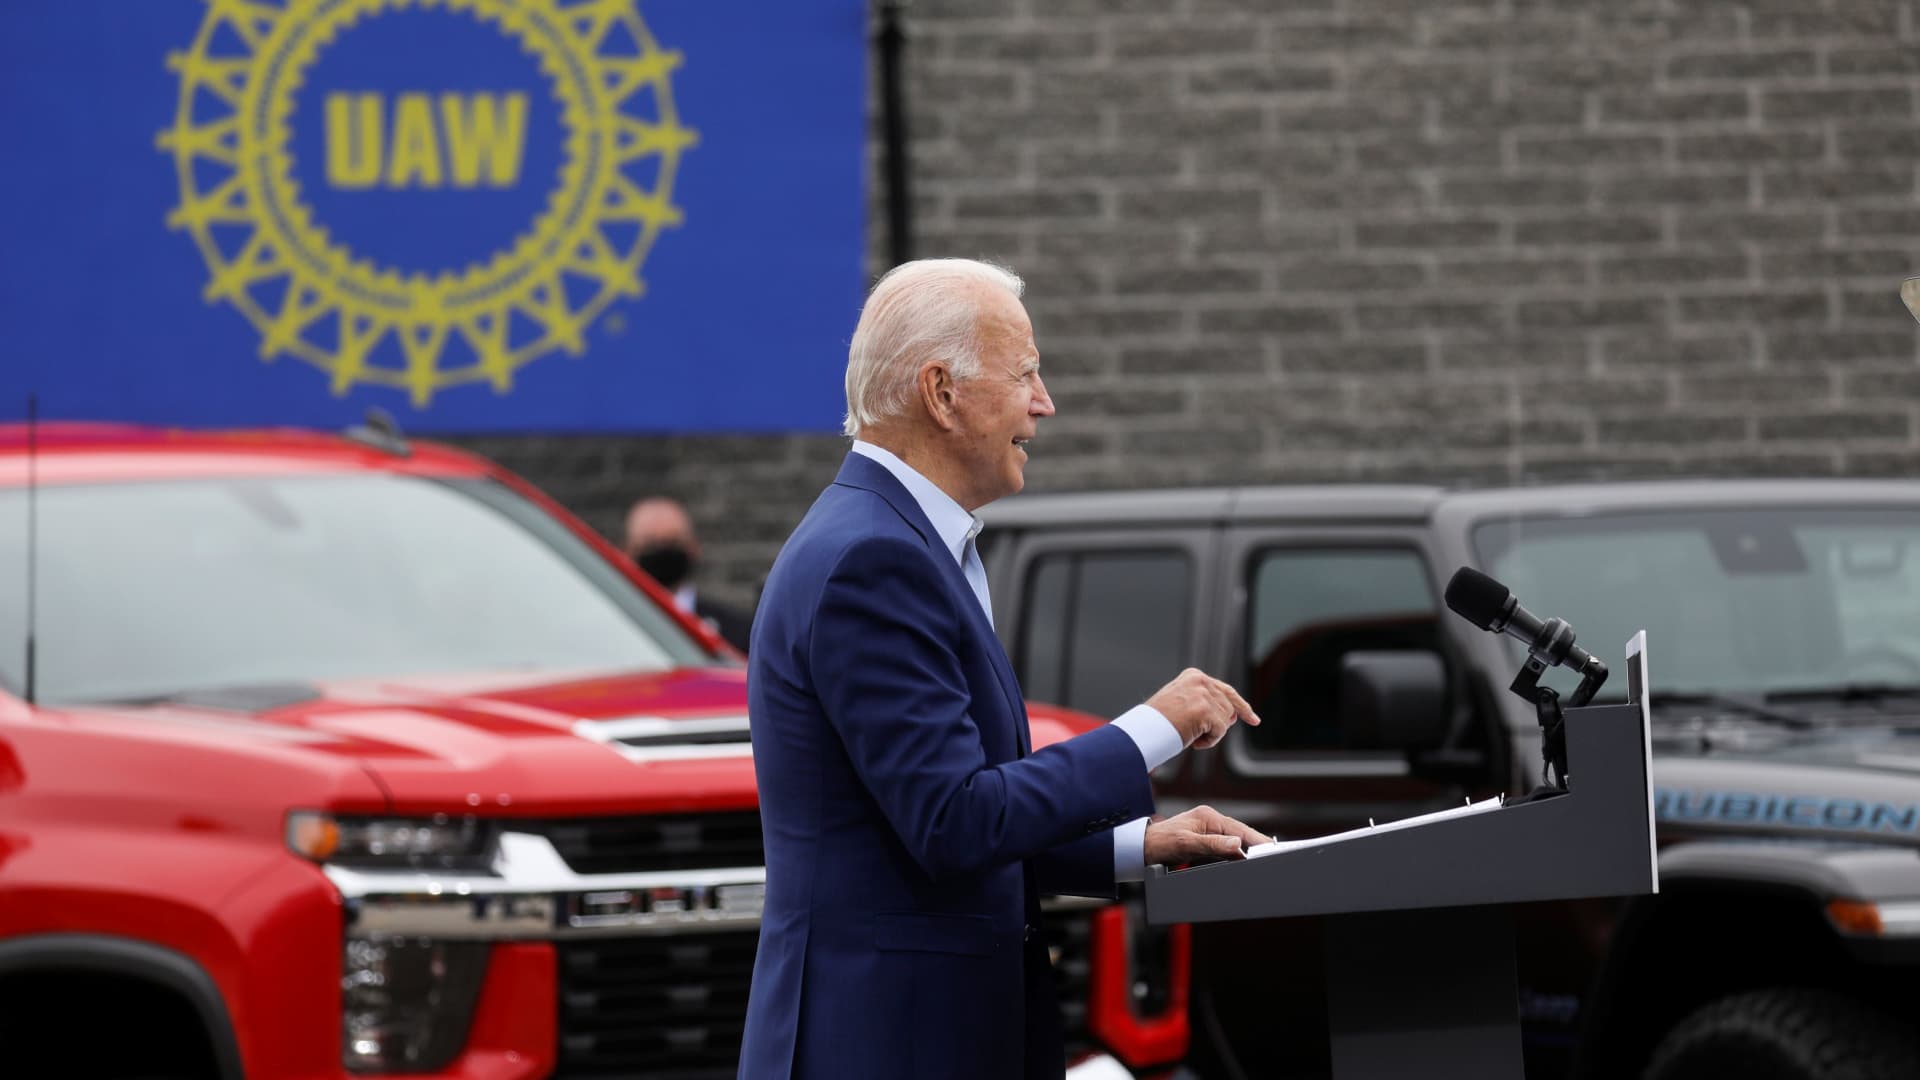 Speaking in front of a backdrop of American-made vehicles and a UAW sign, President Joe Biden speaks about new proposals to protect U.S. jobs during a campaign stop in Warren, Michigan, September 9, 2020.